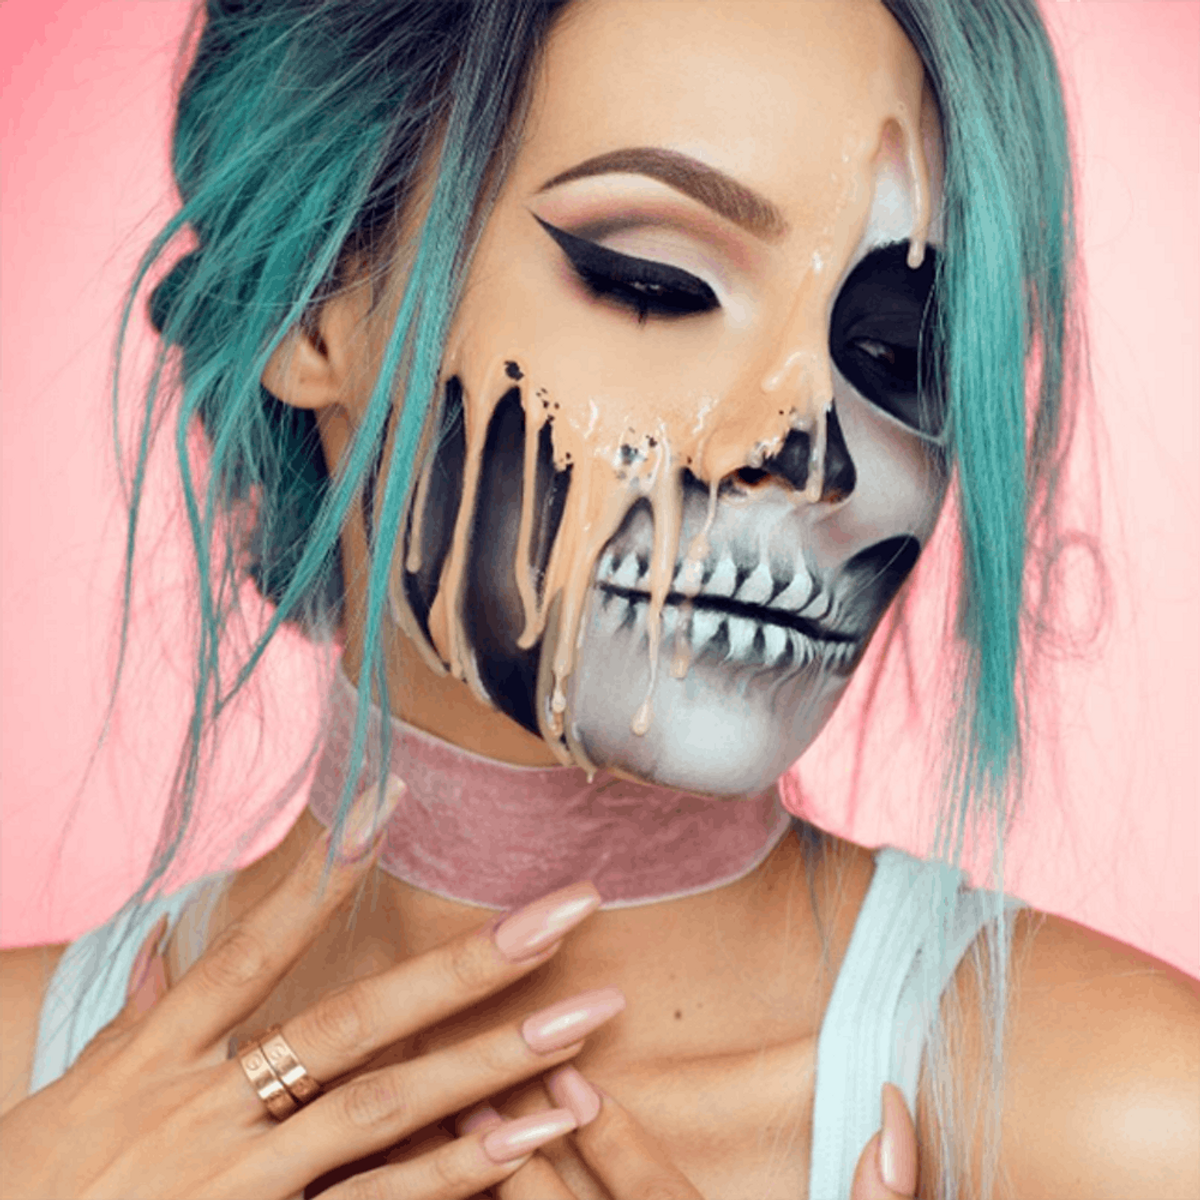 10 Over-the-Top Halloween Makeup Looks to Try This Year